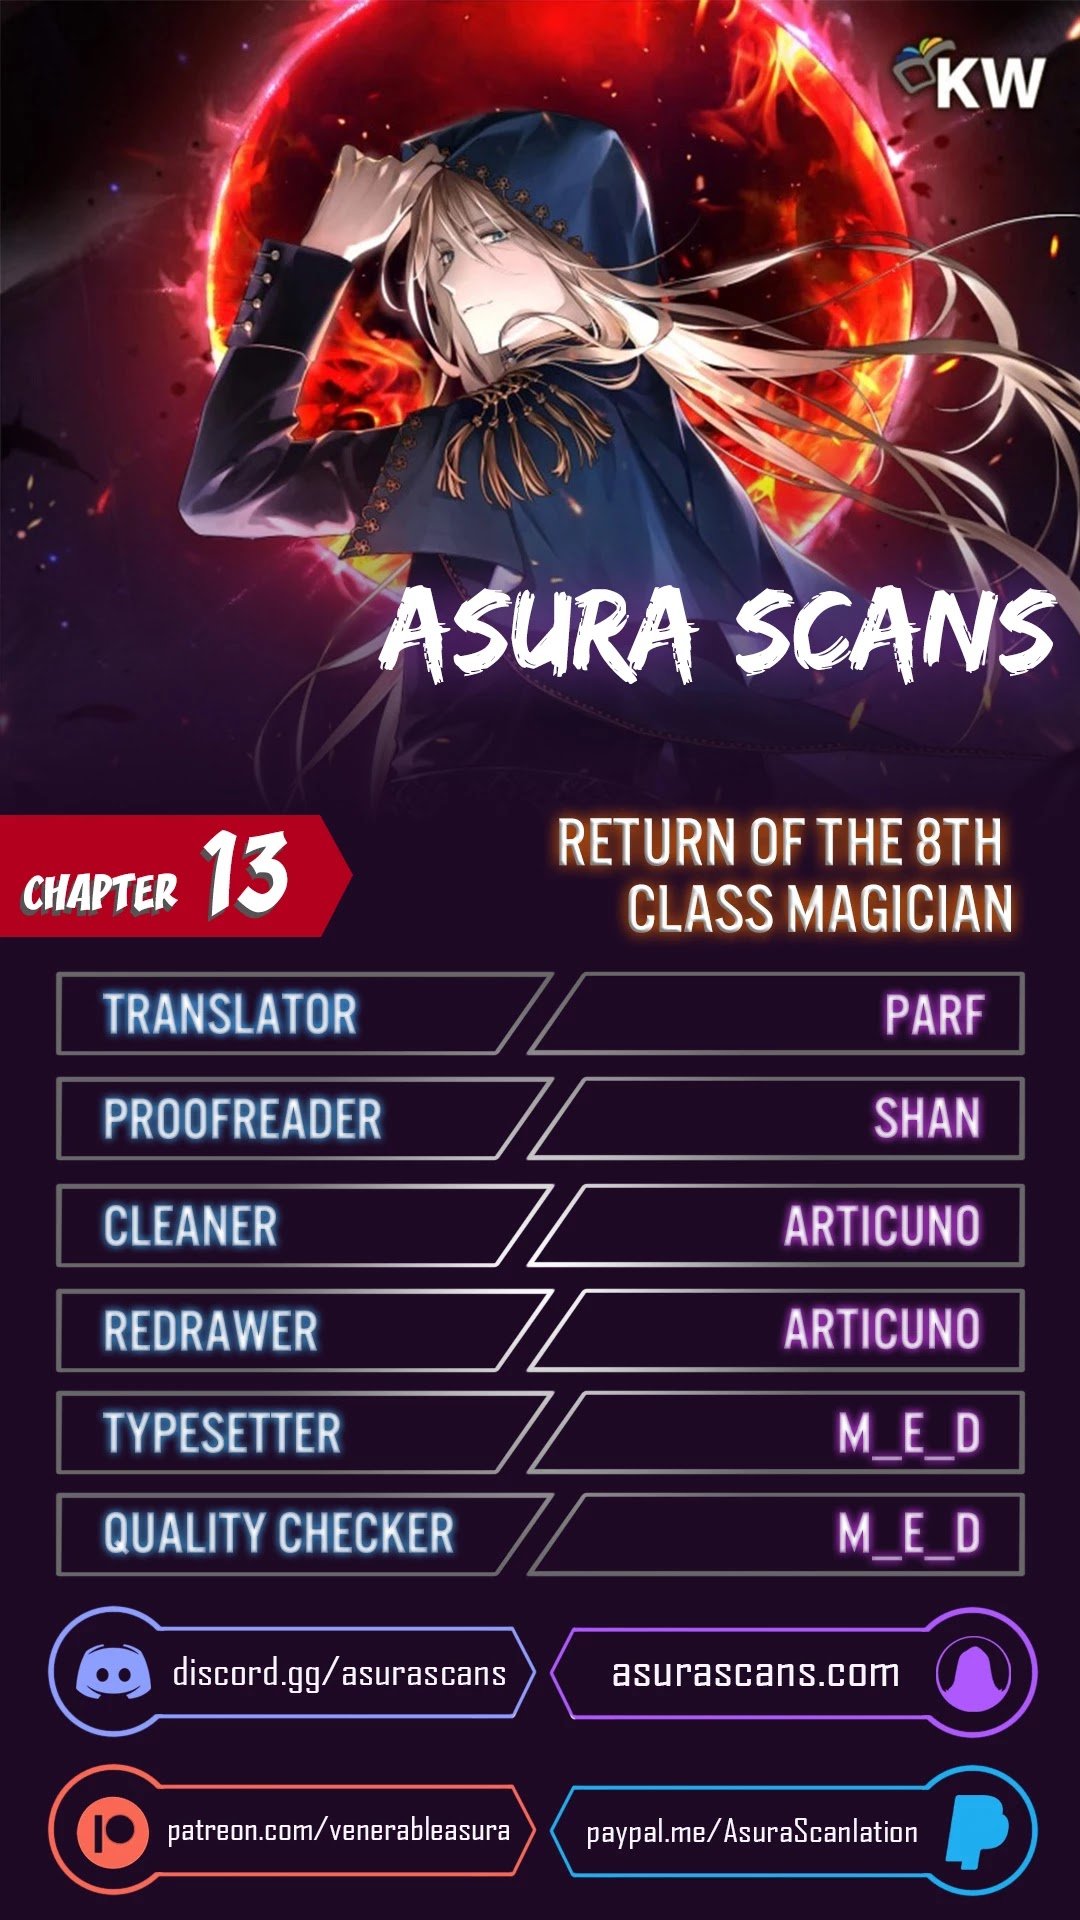 Return of the 8th class Magician chapter 13